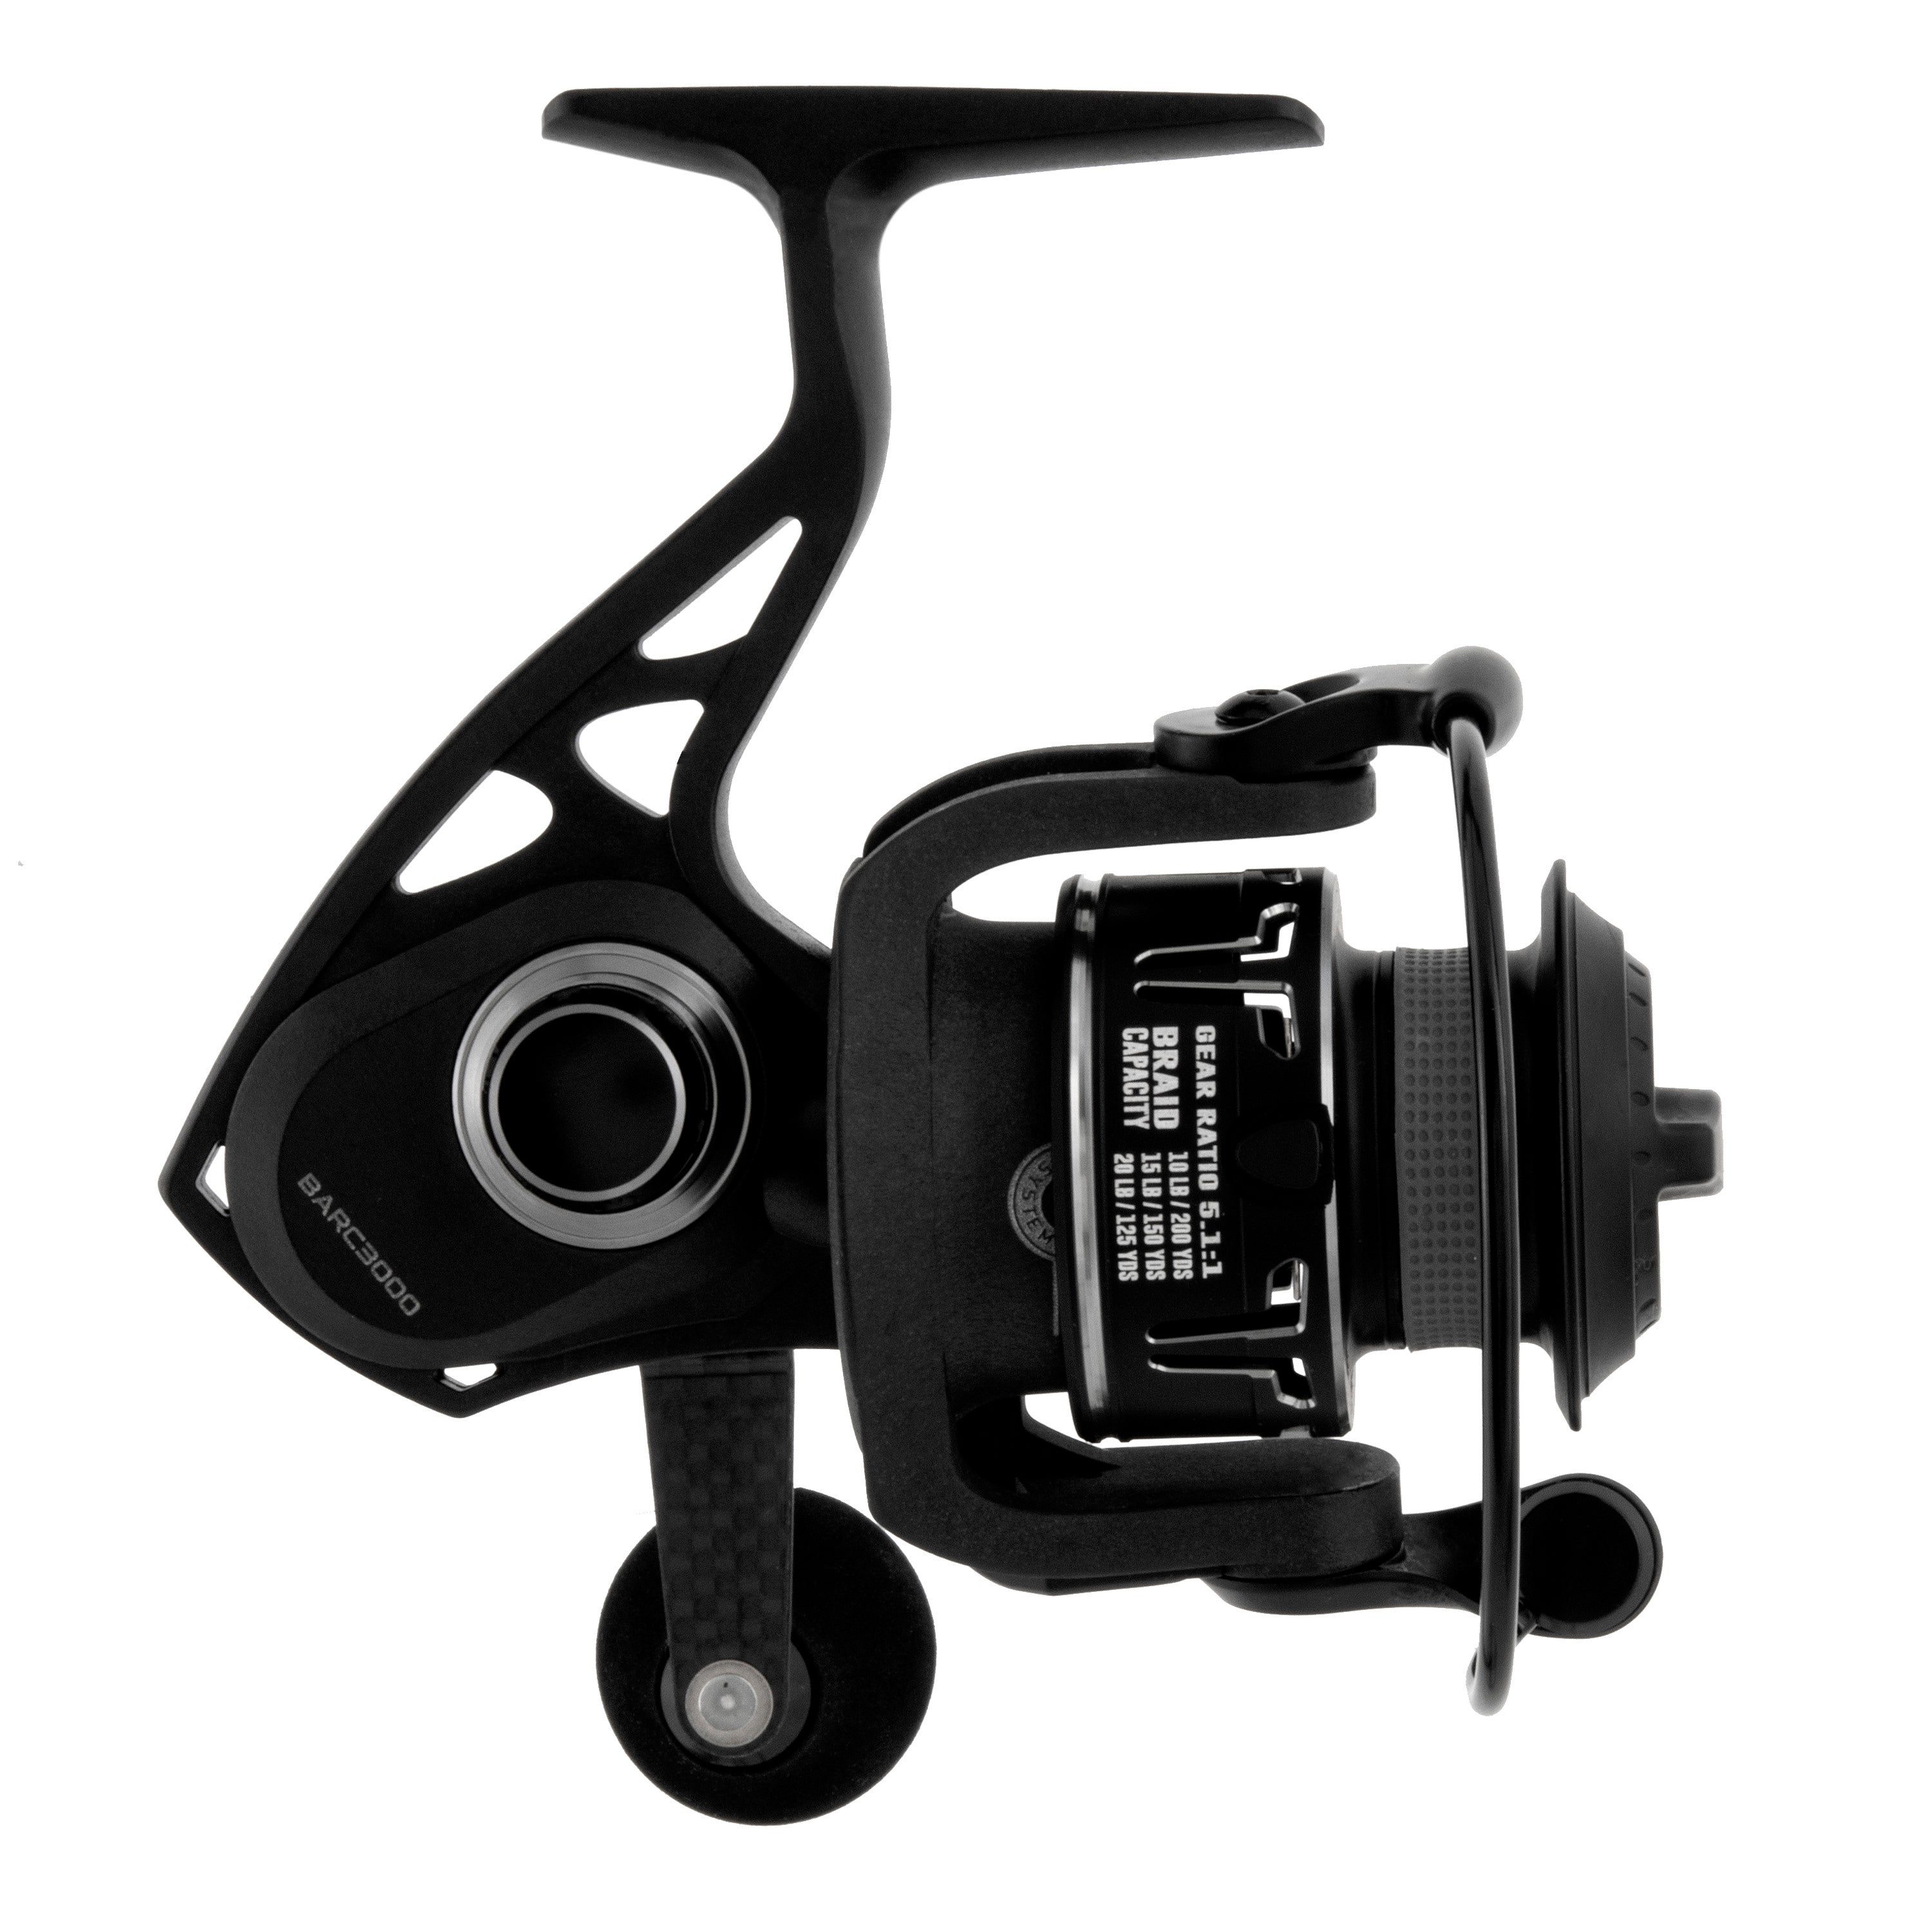 SEA MAX© Complete Sea Fishing Kit With 10' Surf Ace© Rod & Hunter Pro®  HP70S Reel